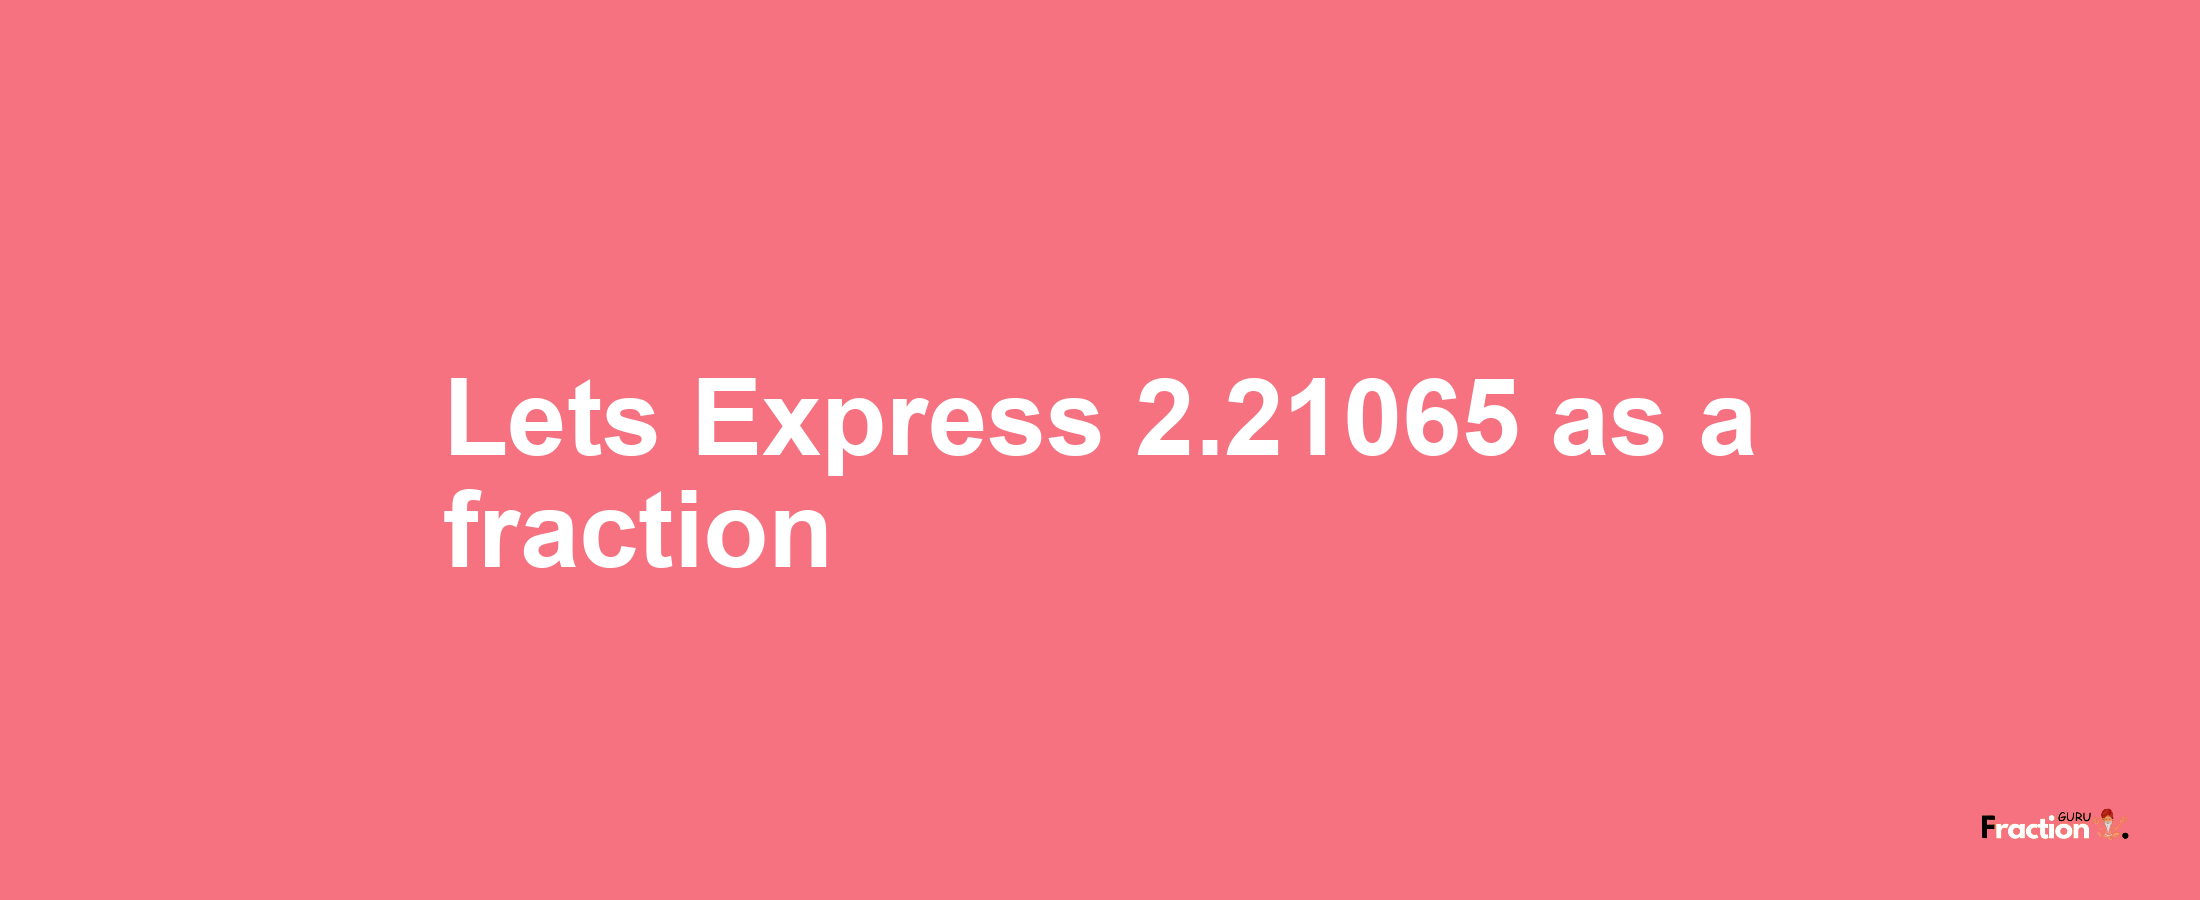 Lets Express 2.21065 as afraction